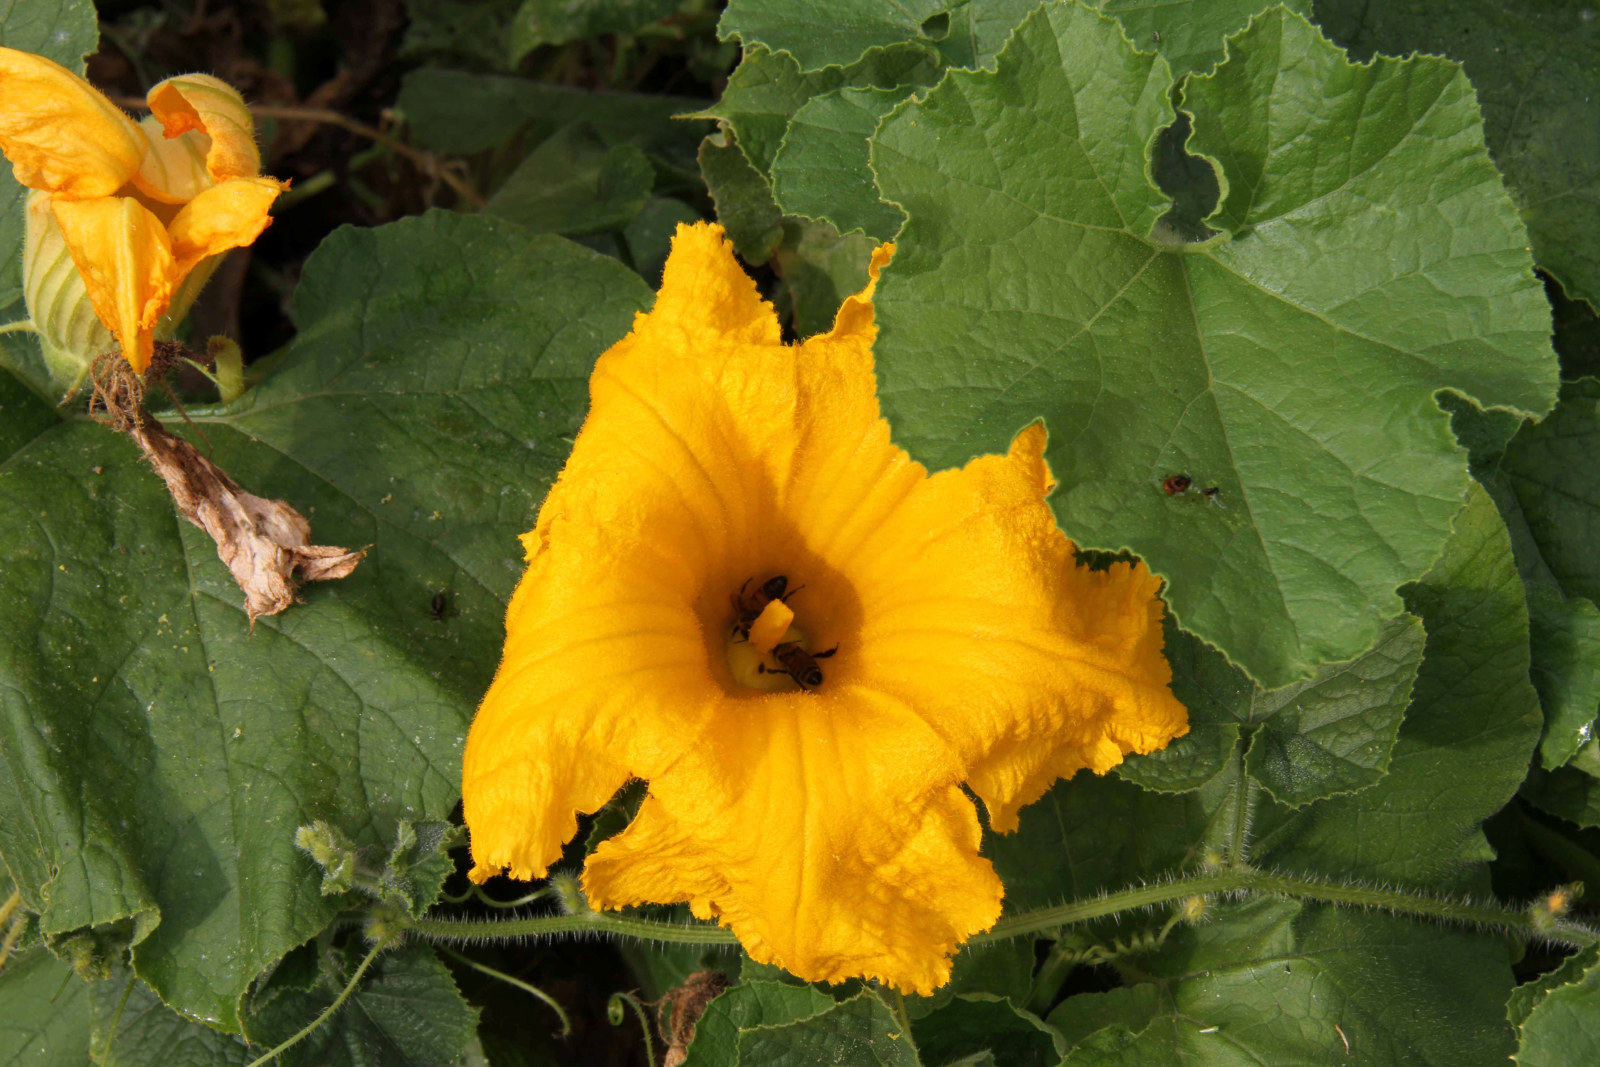 Photograph of a yellow flower on a dark green background